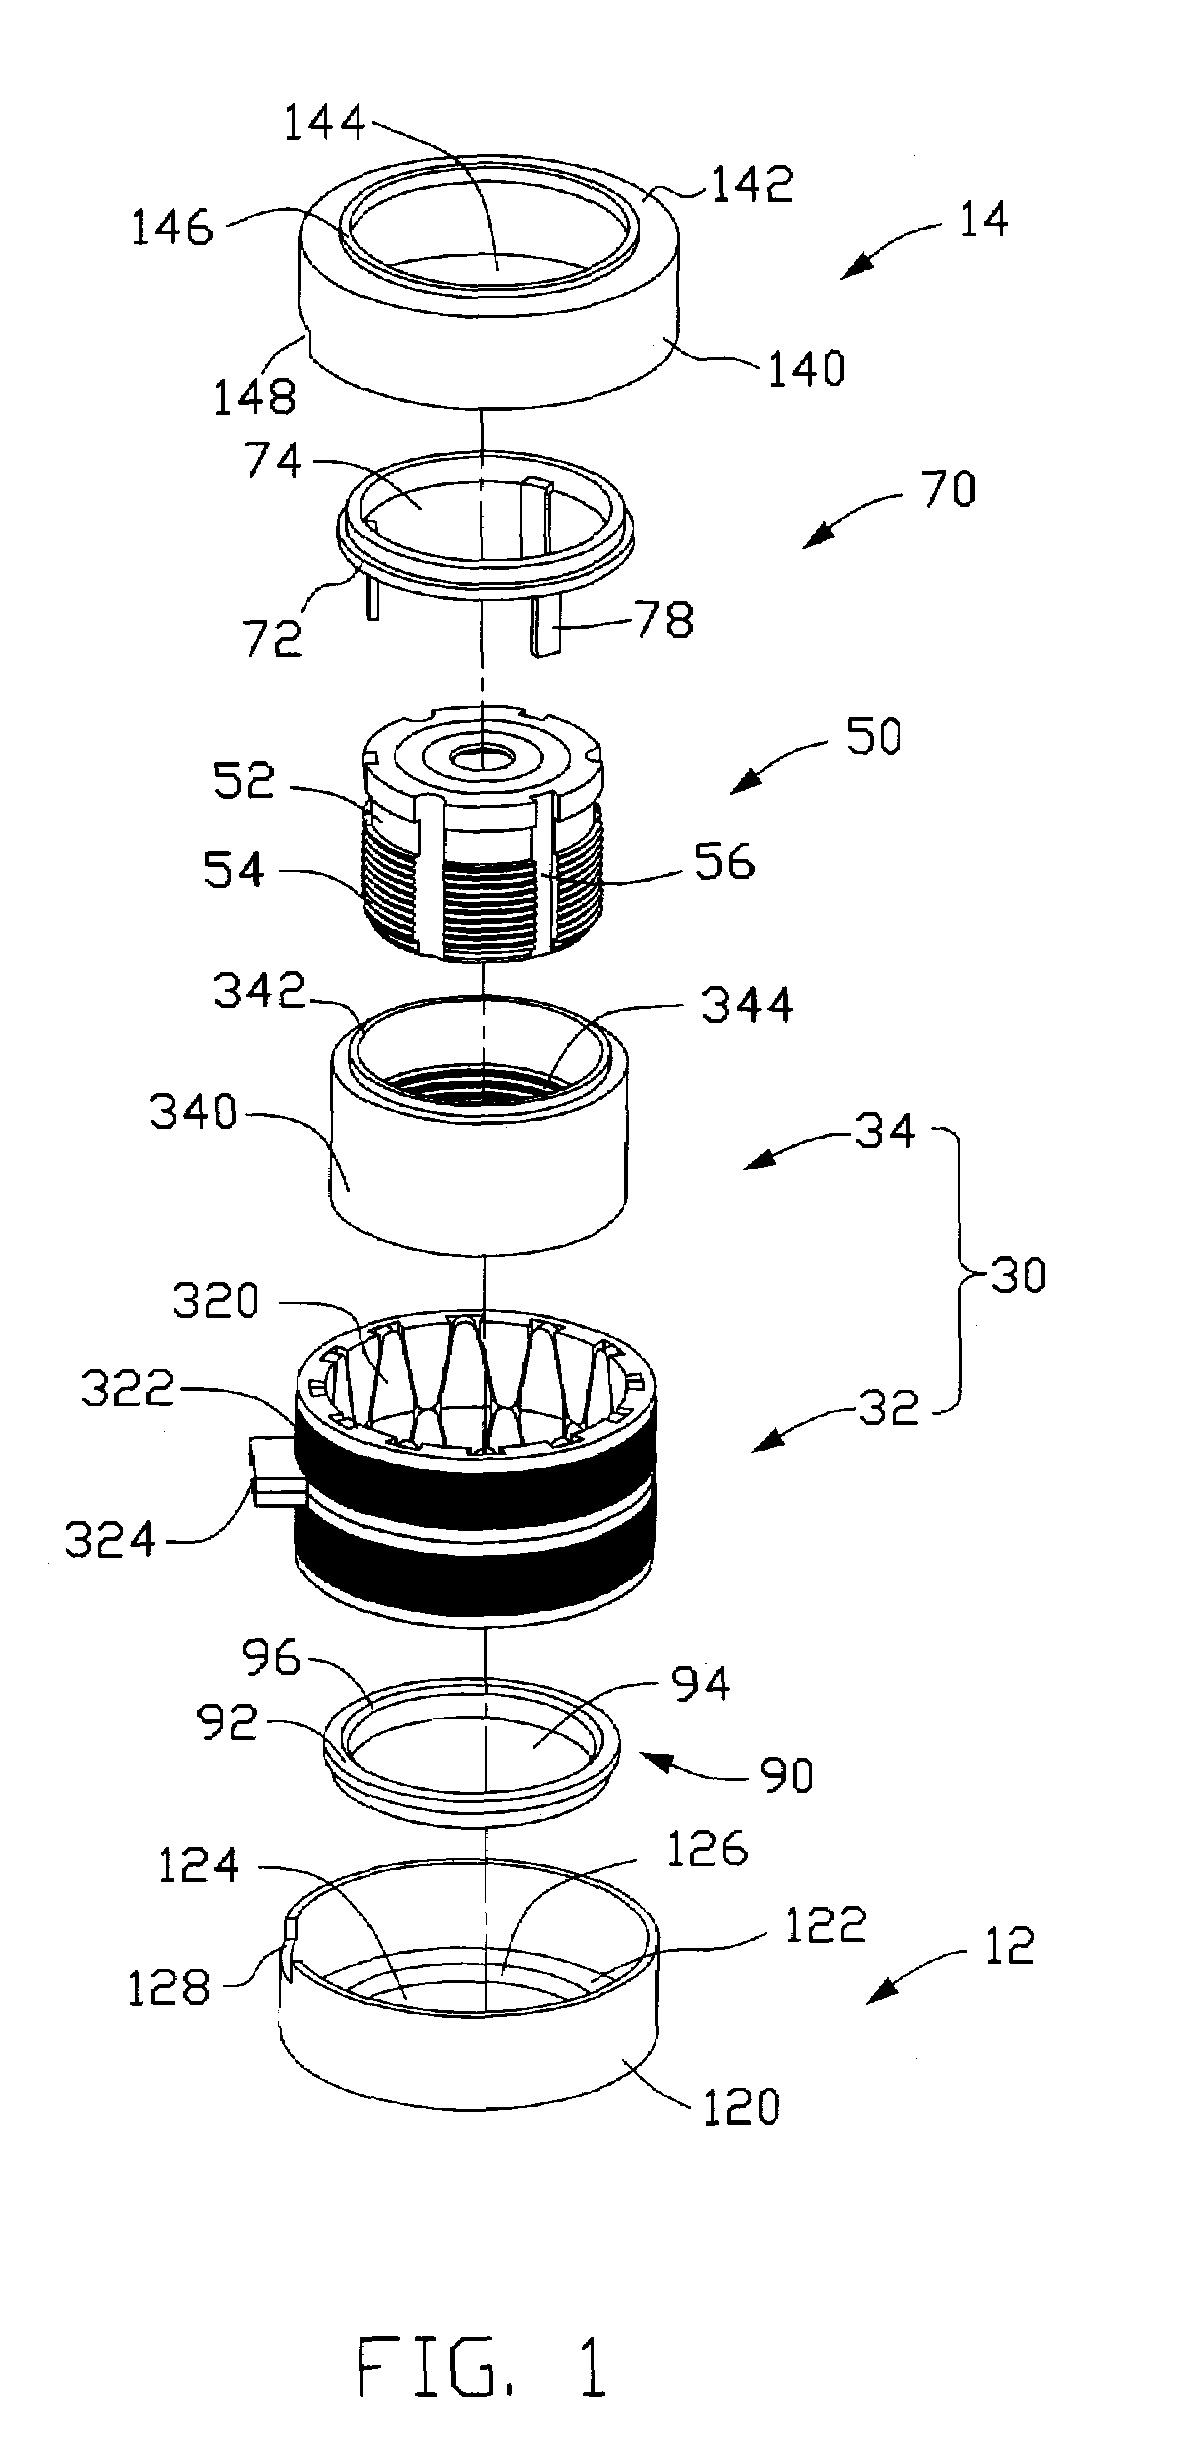 Motor structure with built-in lens